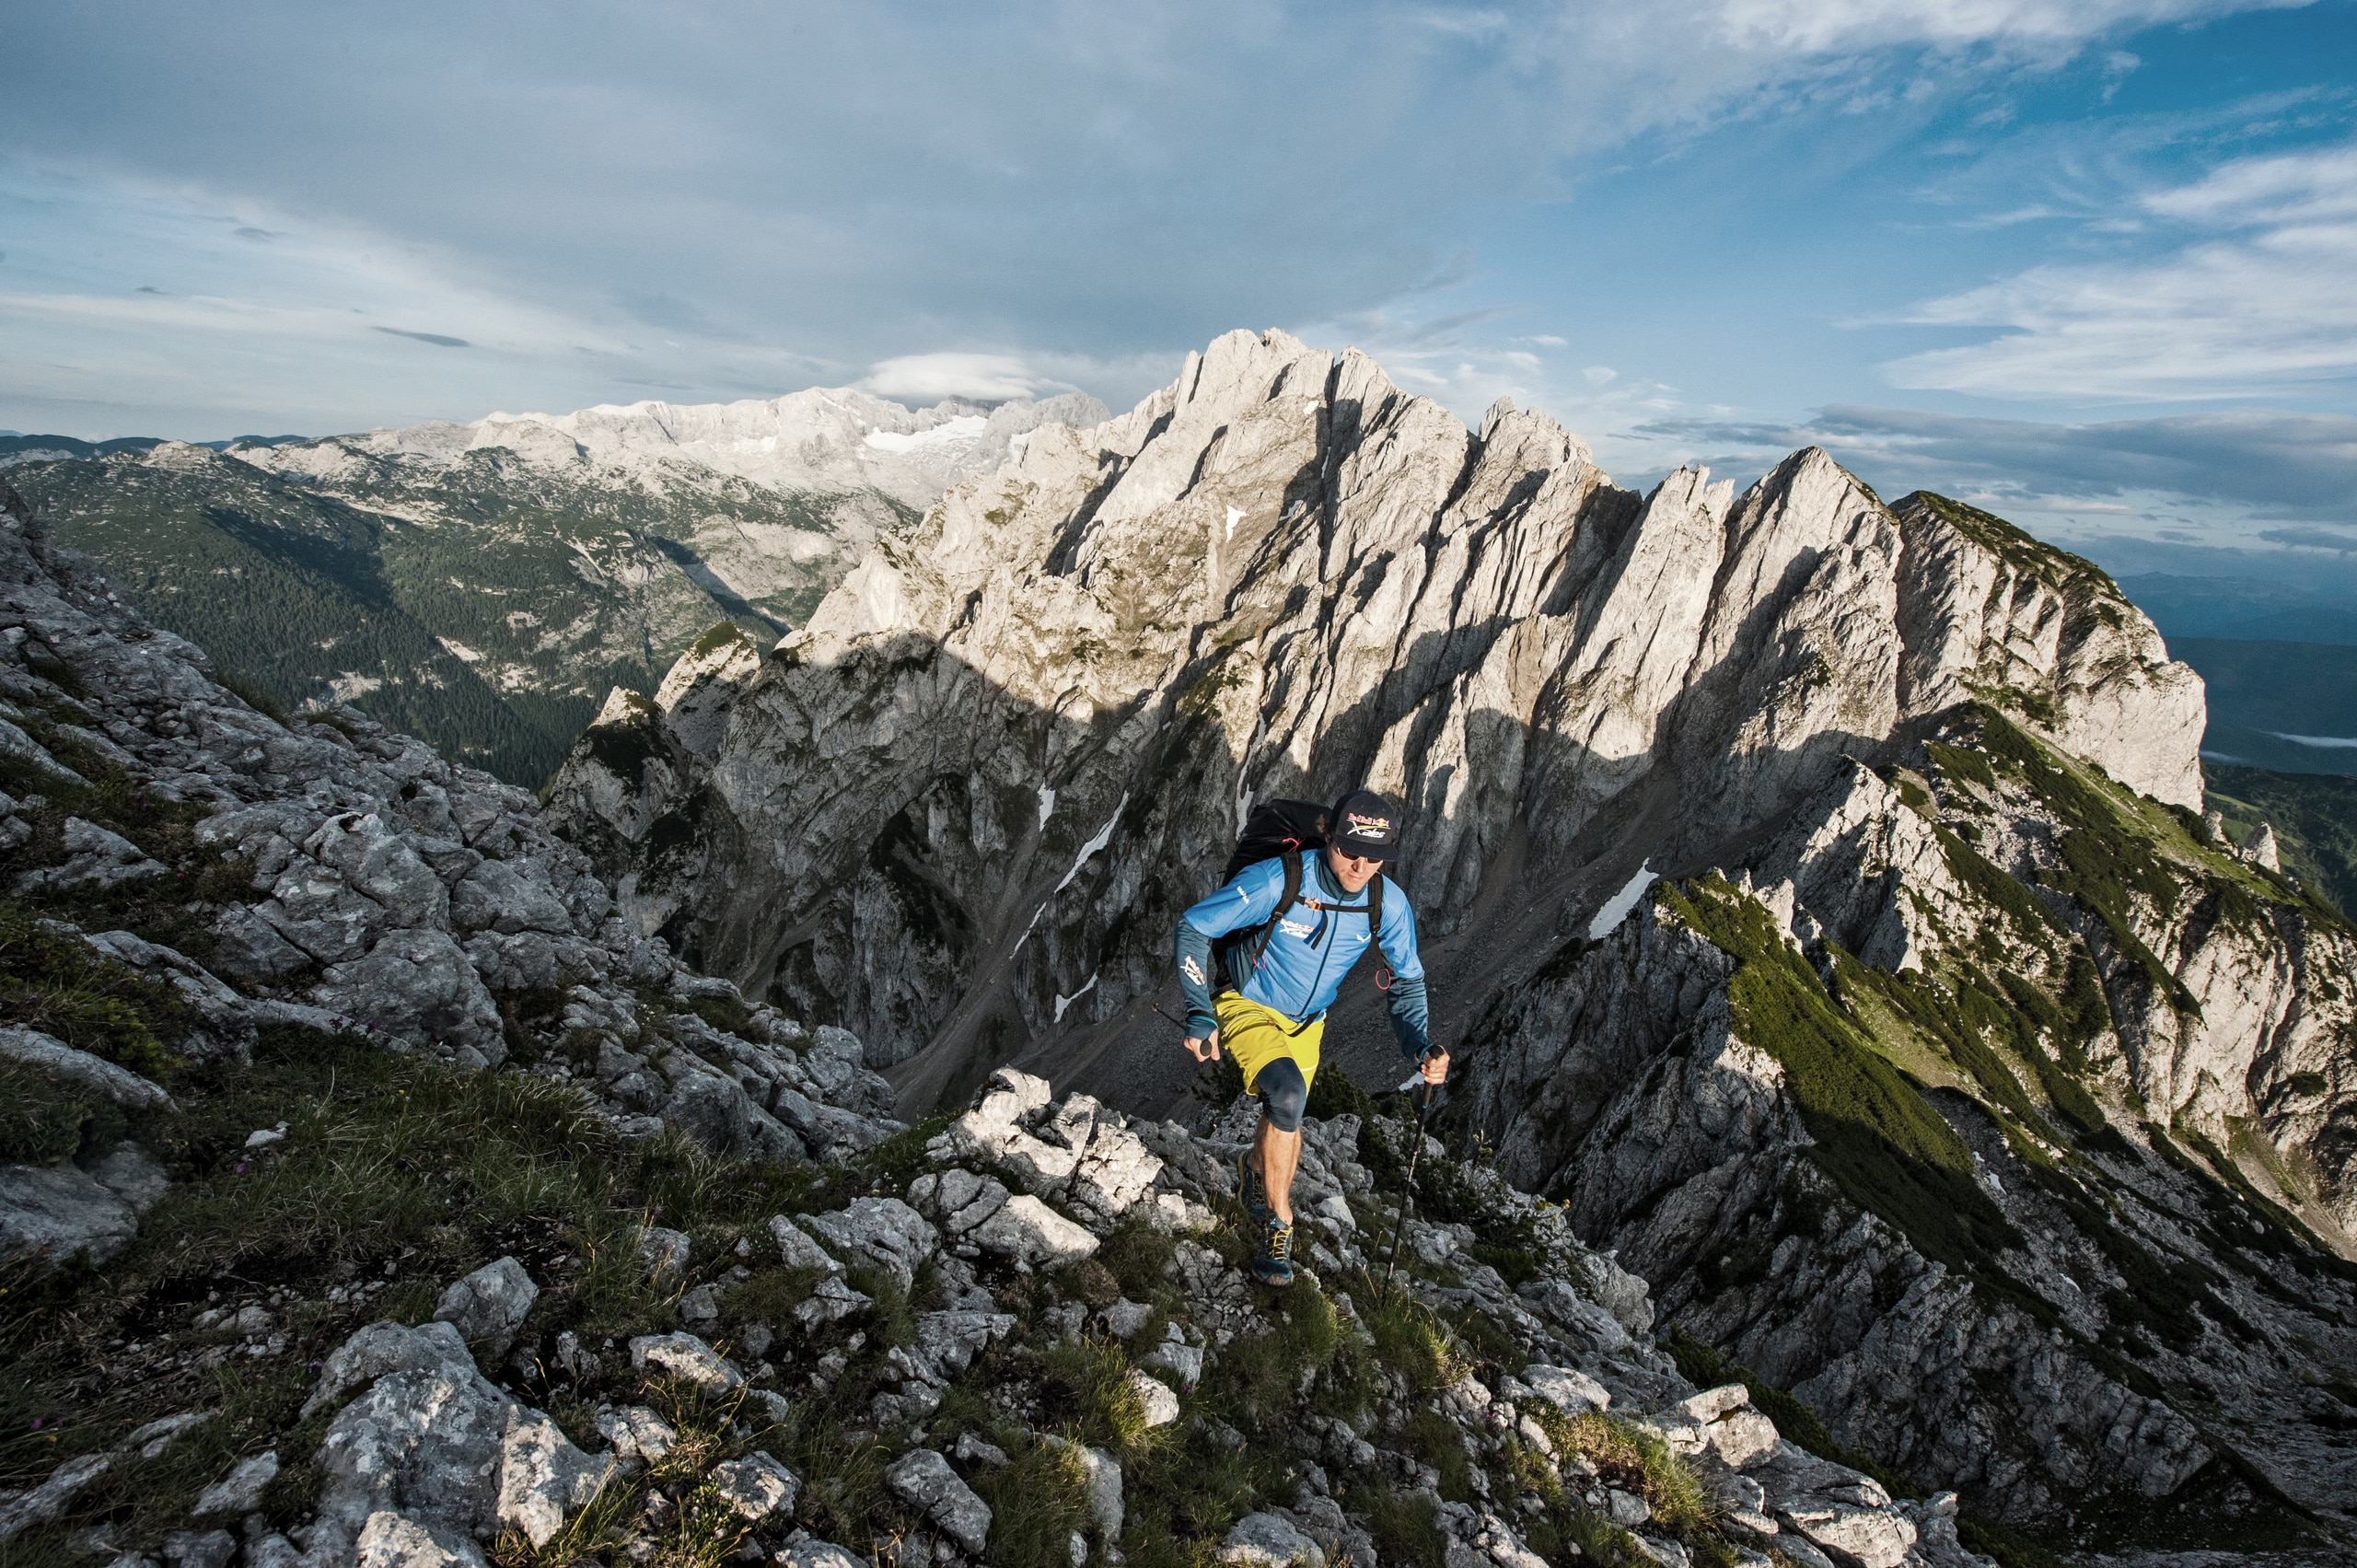 Participant hikes during the Red Bull X-Alps preparations in Gosau, Austria on June 27th 2017